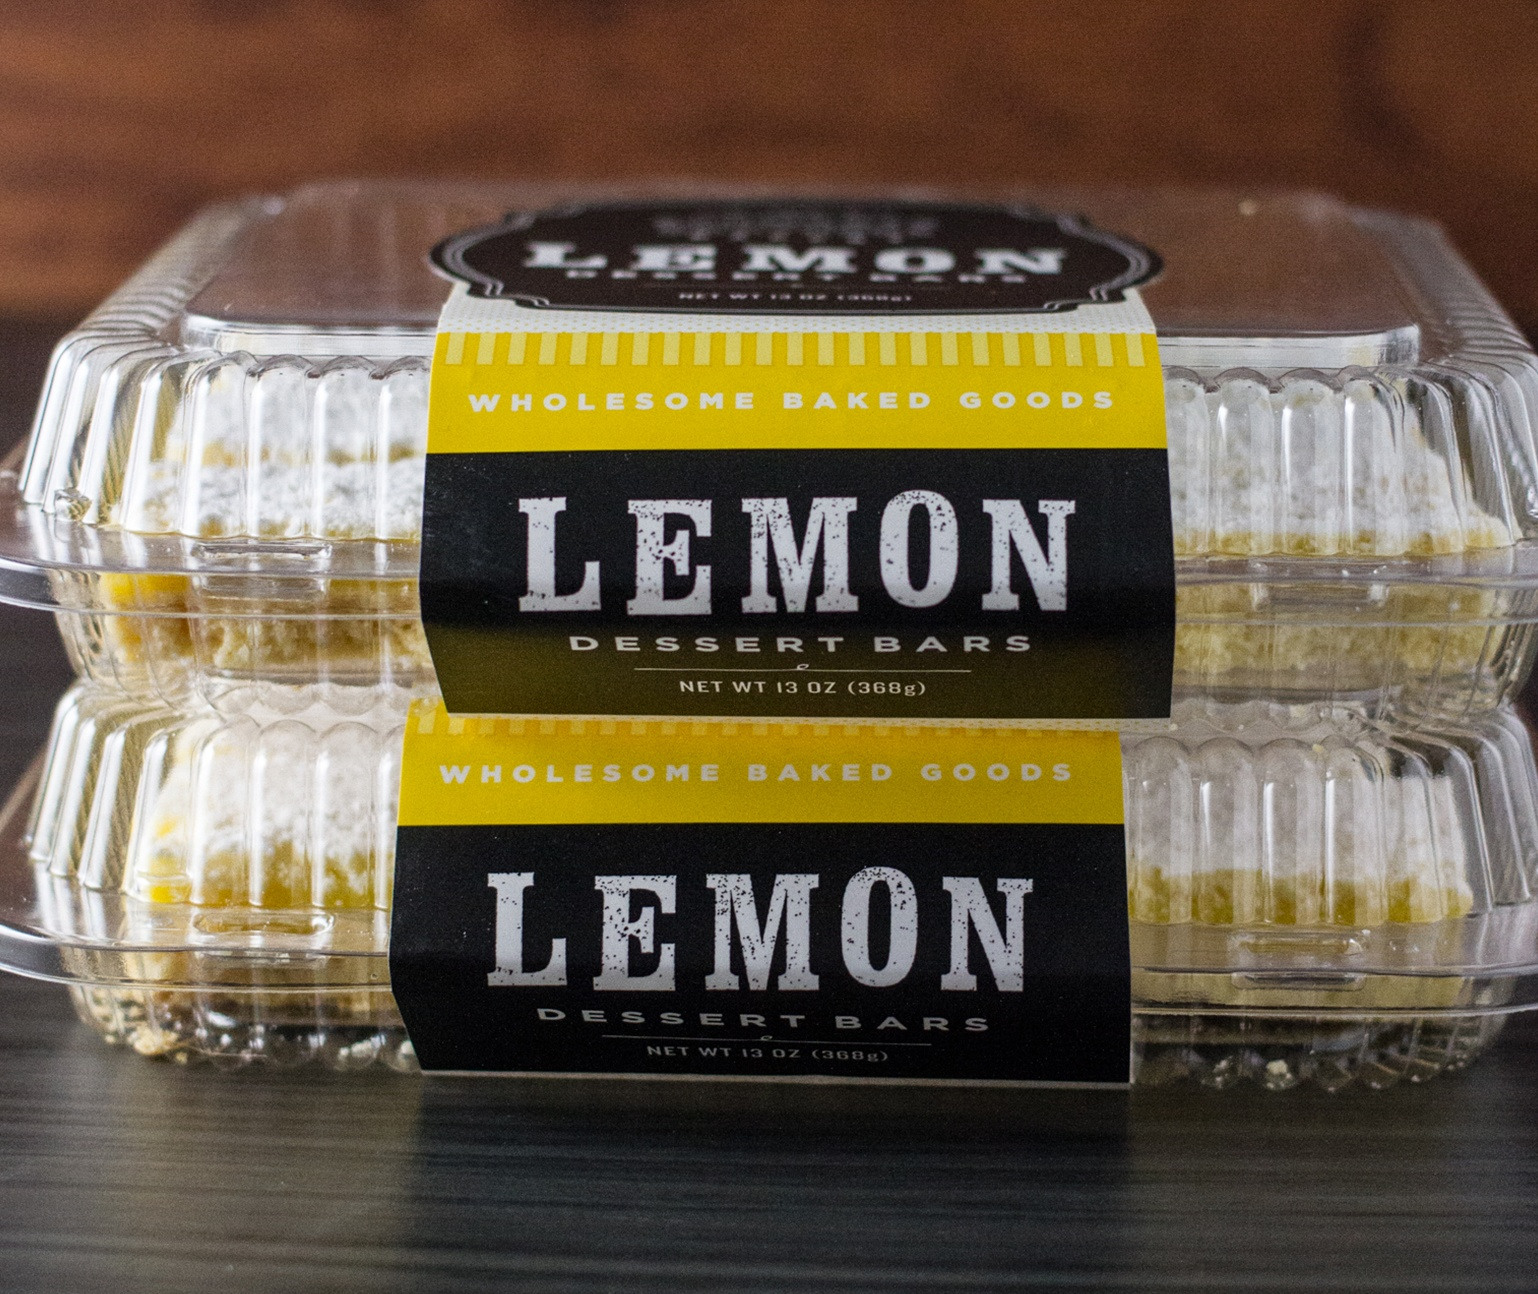 Two Schwartz Brothers Bakery lemon dessert bars clamshell packages stacked on top of each other on a countertop